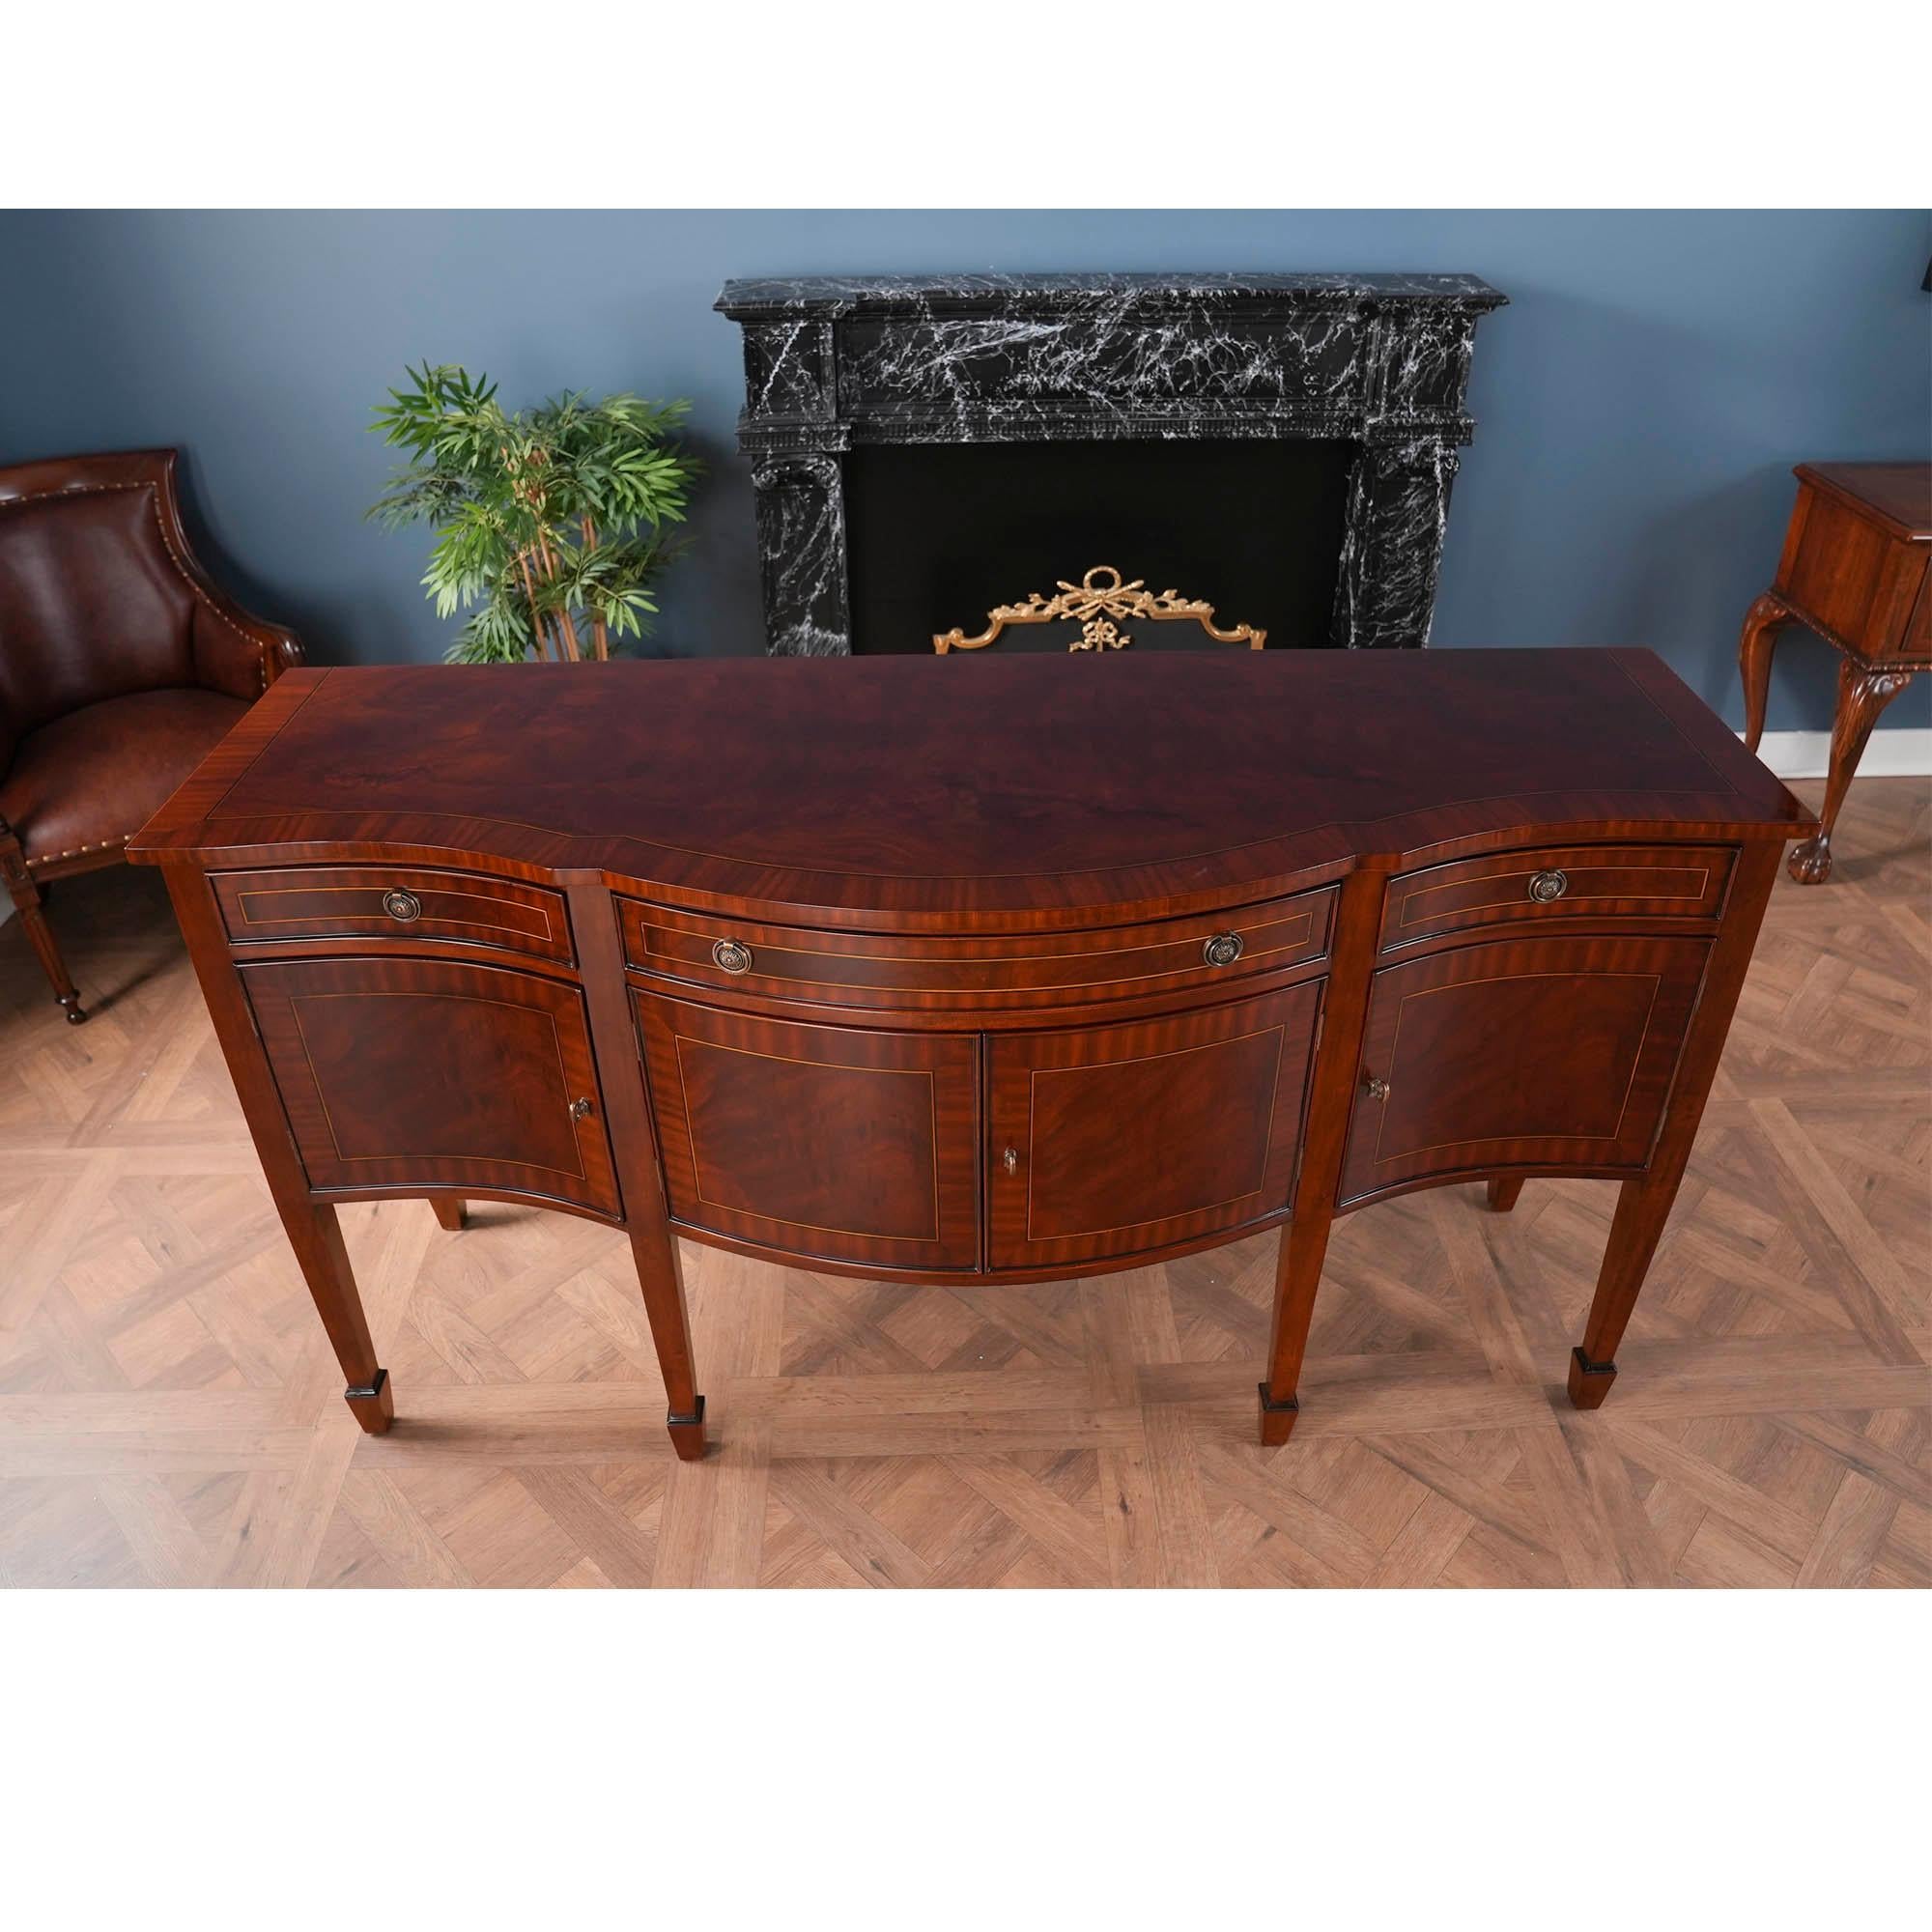 Simple yet sophisticated the Large Mahogany Sideboard has everything going for it. A slightly larger size than many of our other high leg sideboards this item boasts a great amount of storage space featuring three drawers over four doors. The